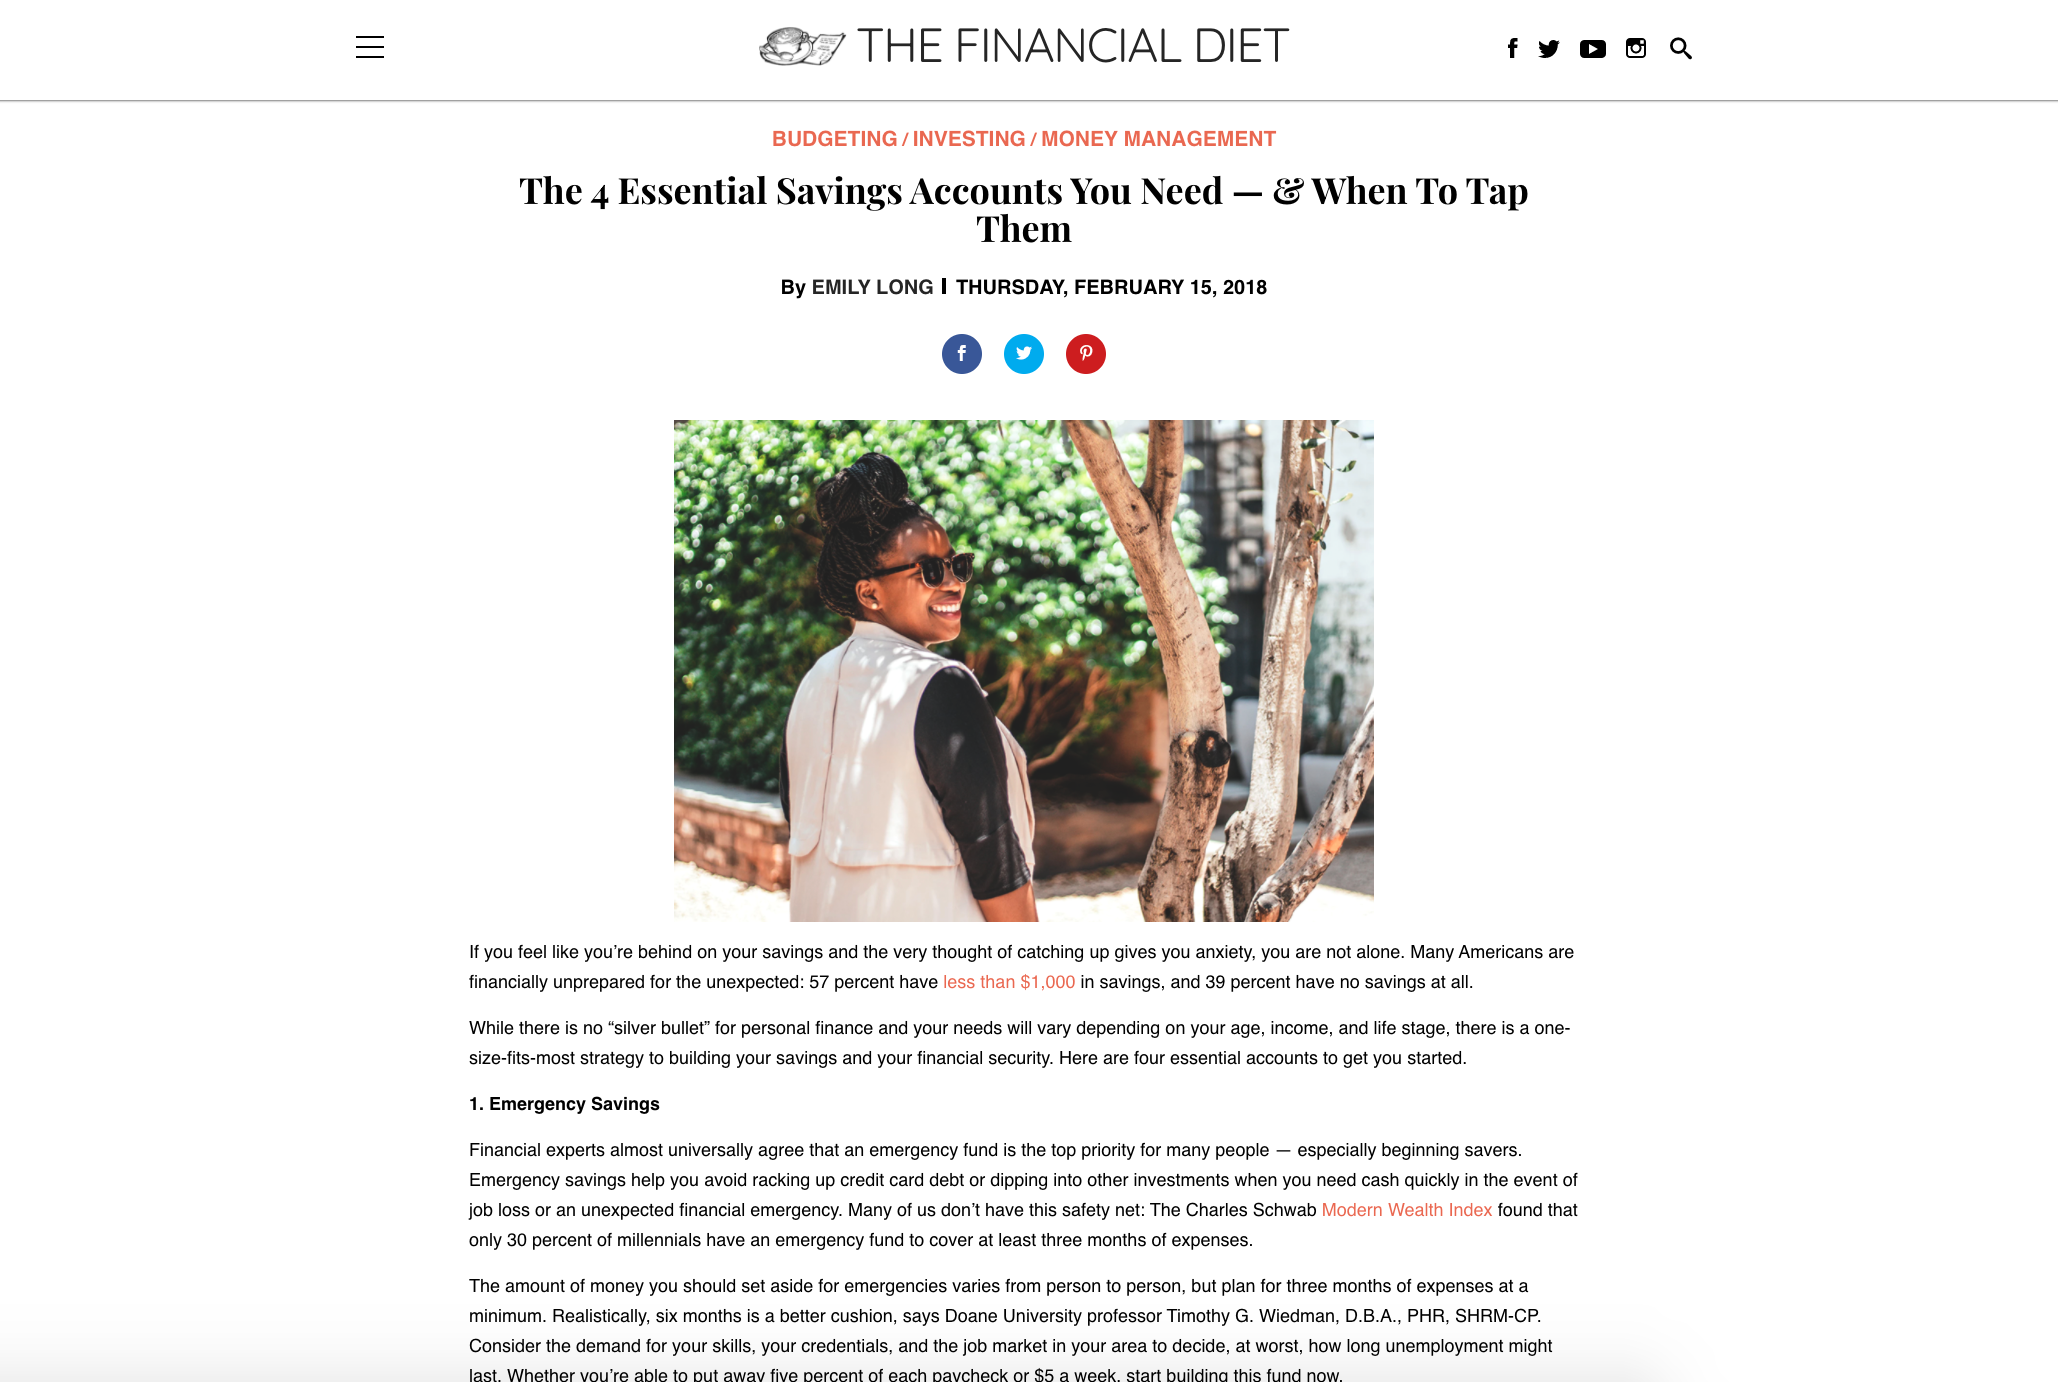 The Financial Diet: The 4 Essential Savings Accounts You Need